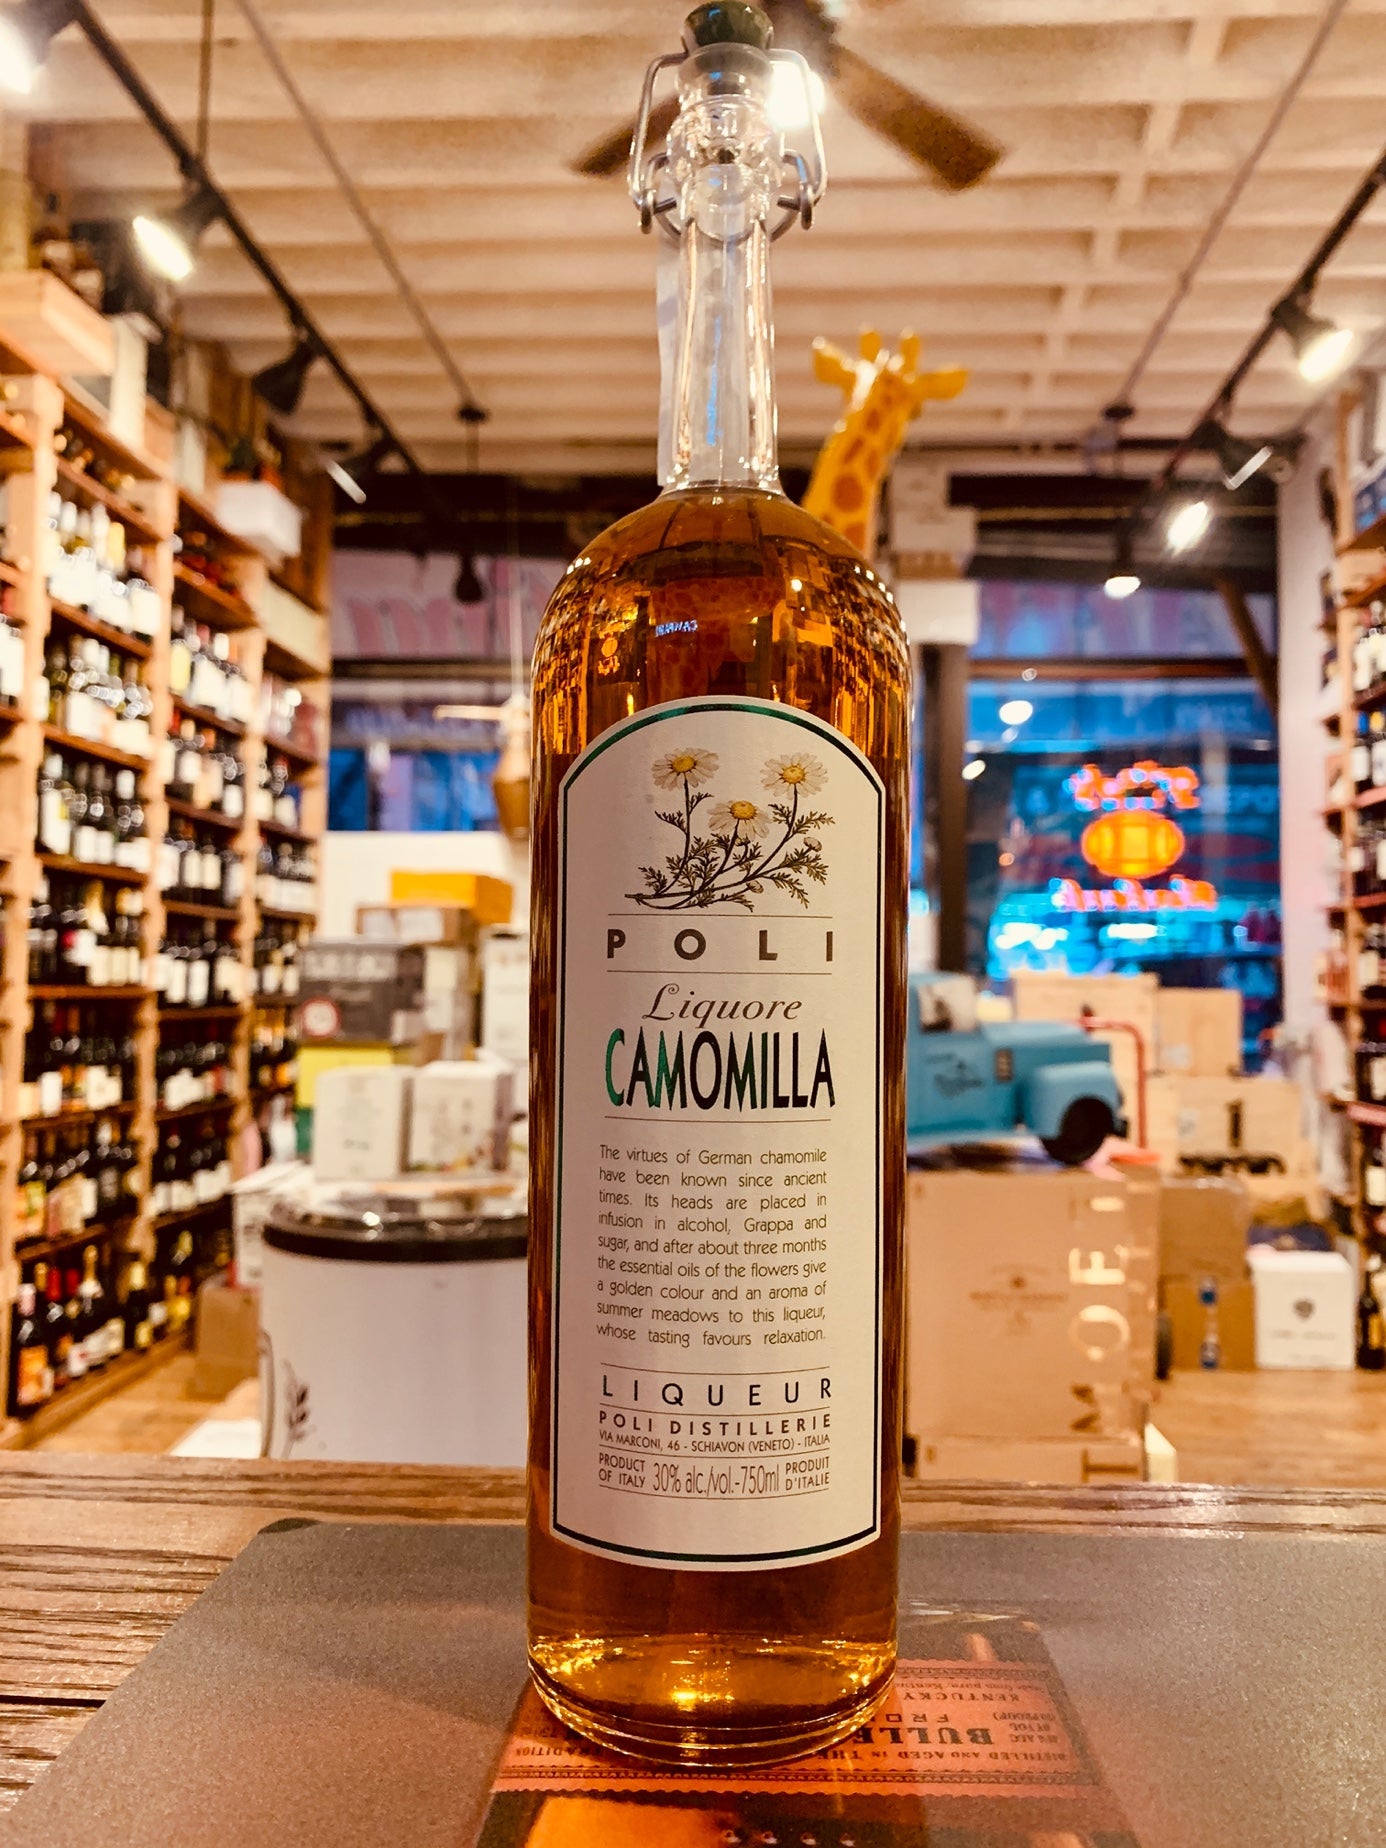 Poli Camomilla Liqueur 750mL a tall slender clear glass bottle with a thing slender neck and pop top with a large white label